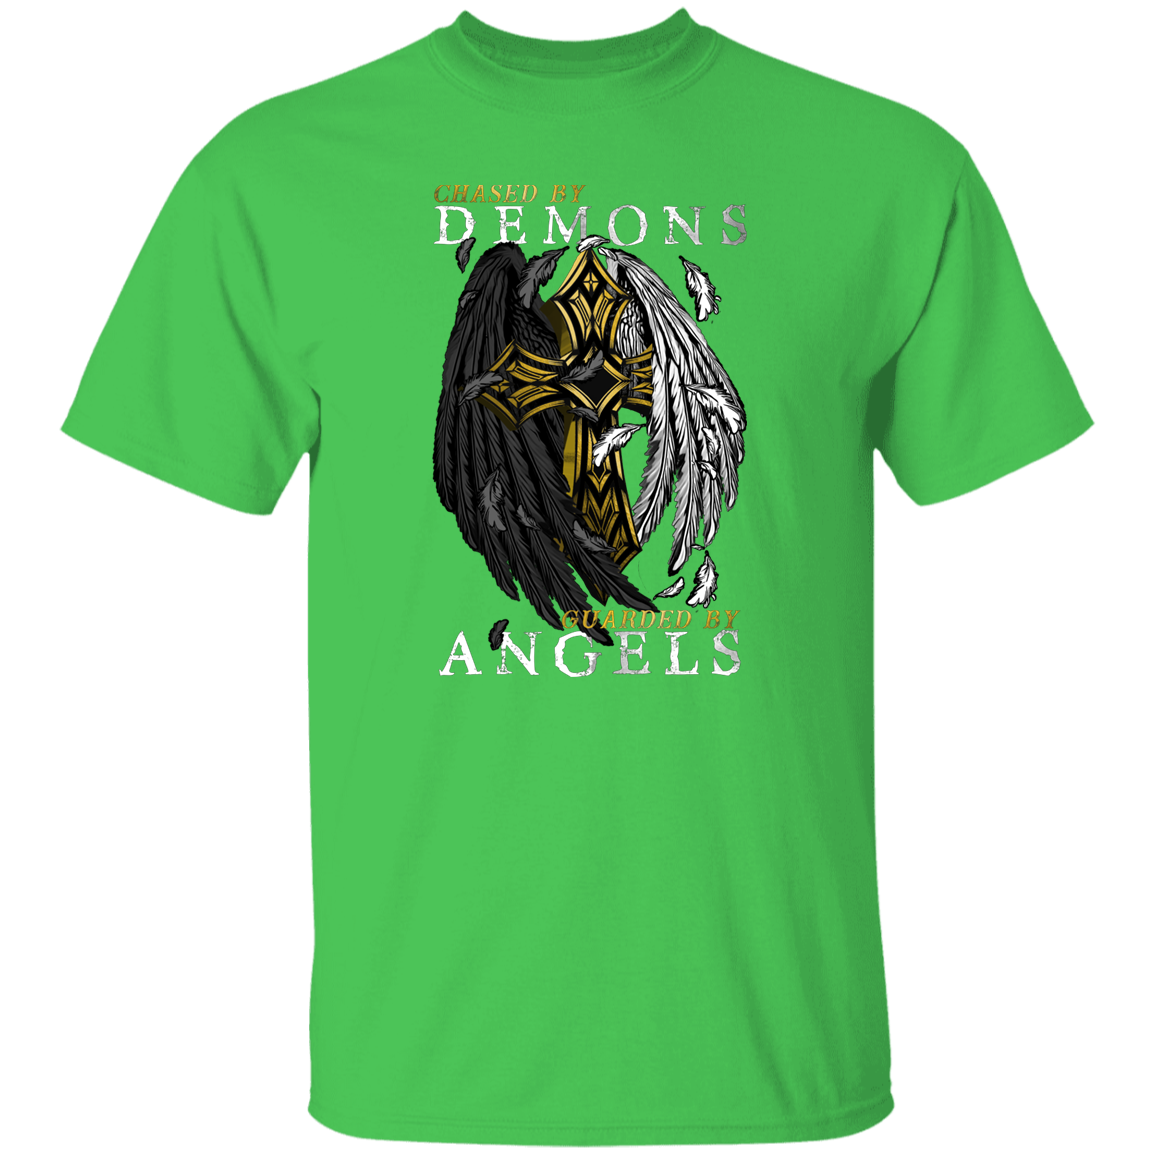 Demons and Angels T-Shirt